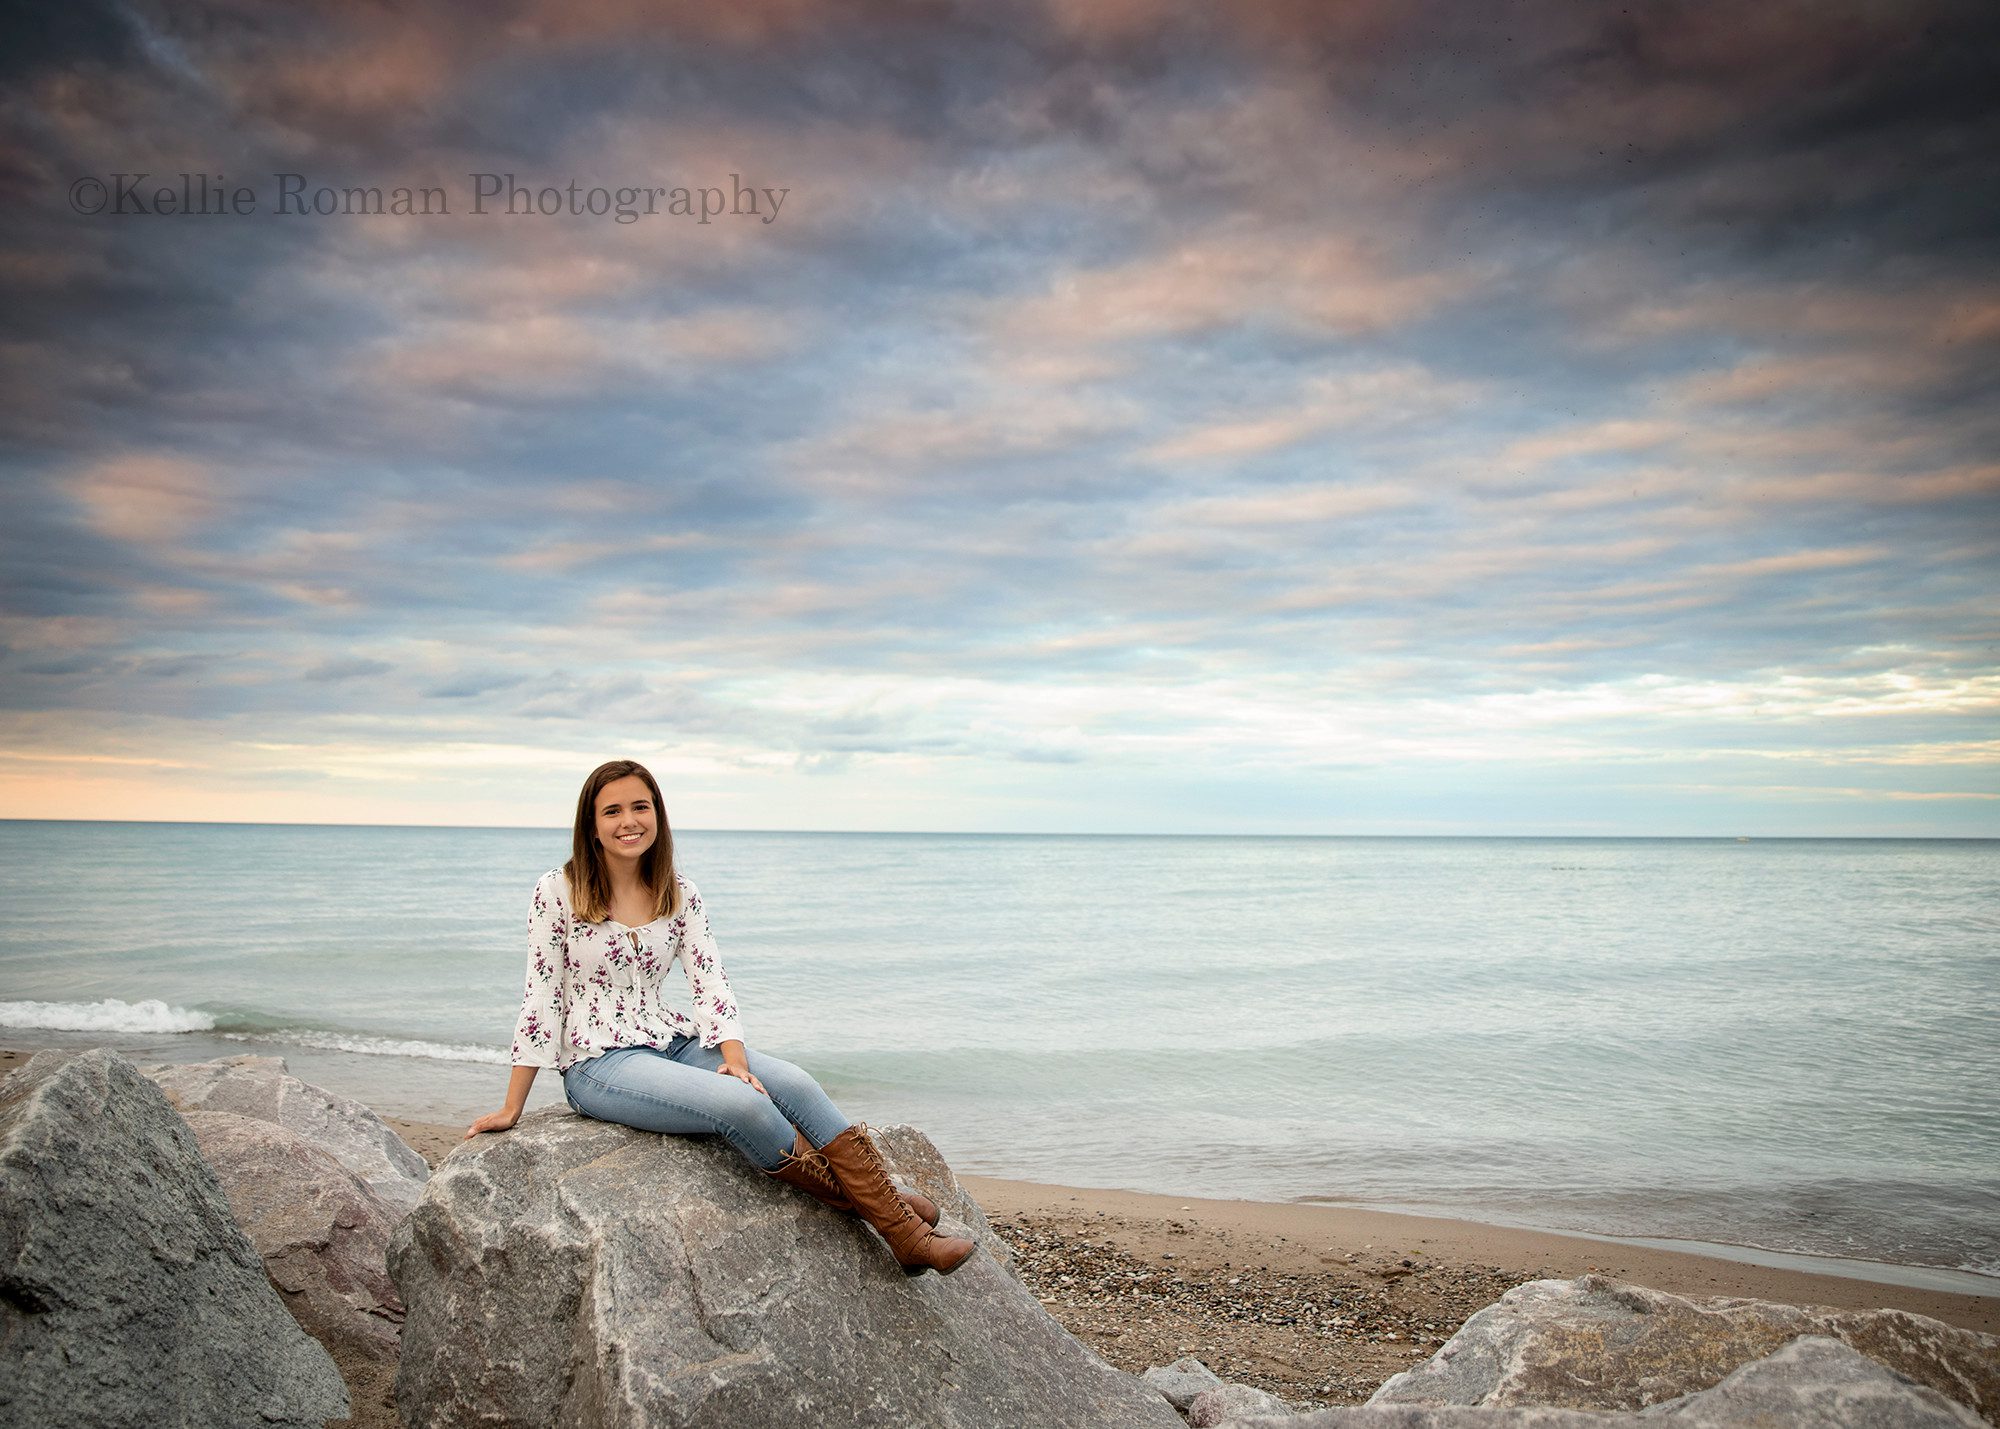 lighthouse senior pics a senior girl sitting on a massive boulder with her legs crossed there are many large rocks around her and a lighthouse behind her the clouds are very dramatic she is looking and smiling at the camera